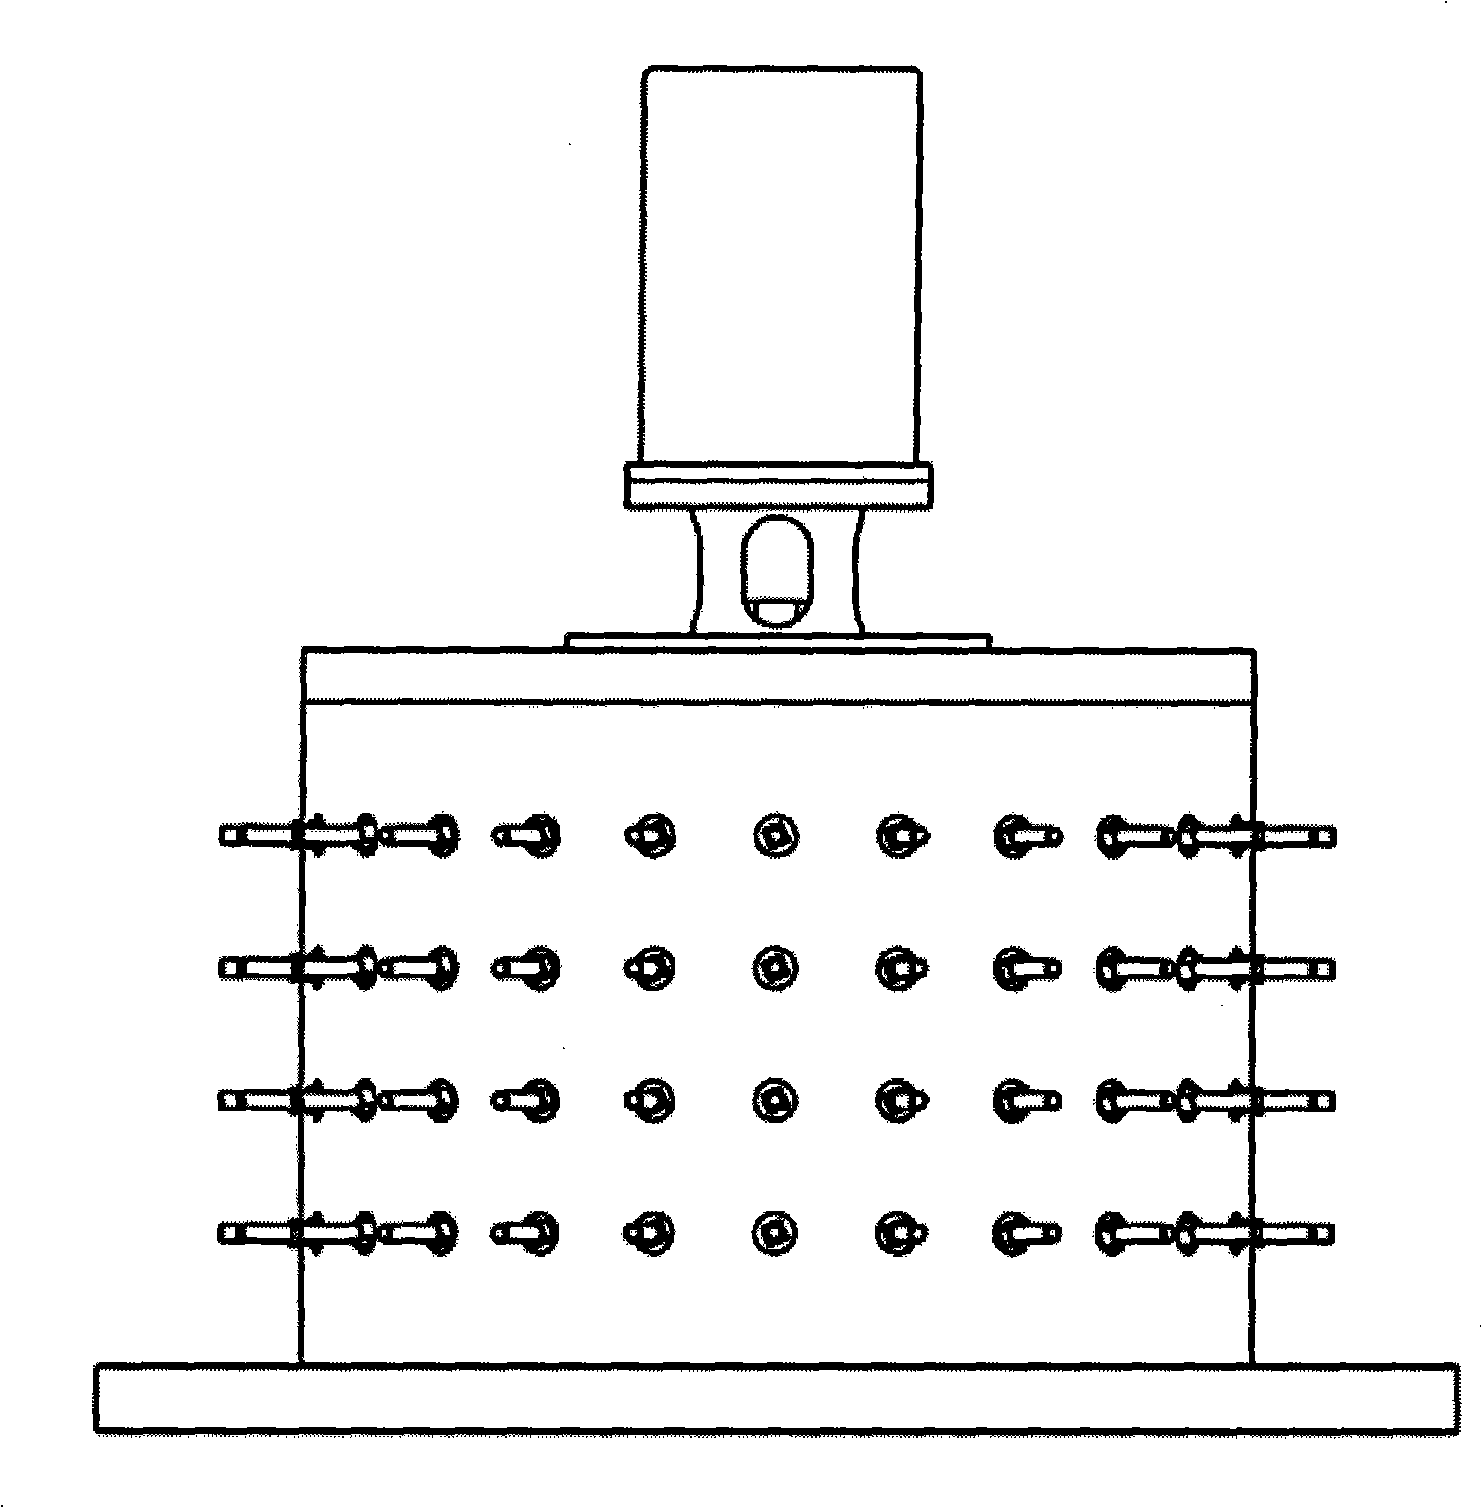 Multi-electrode rotary arrester switch for high-voltage impulse power source